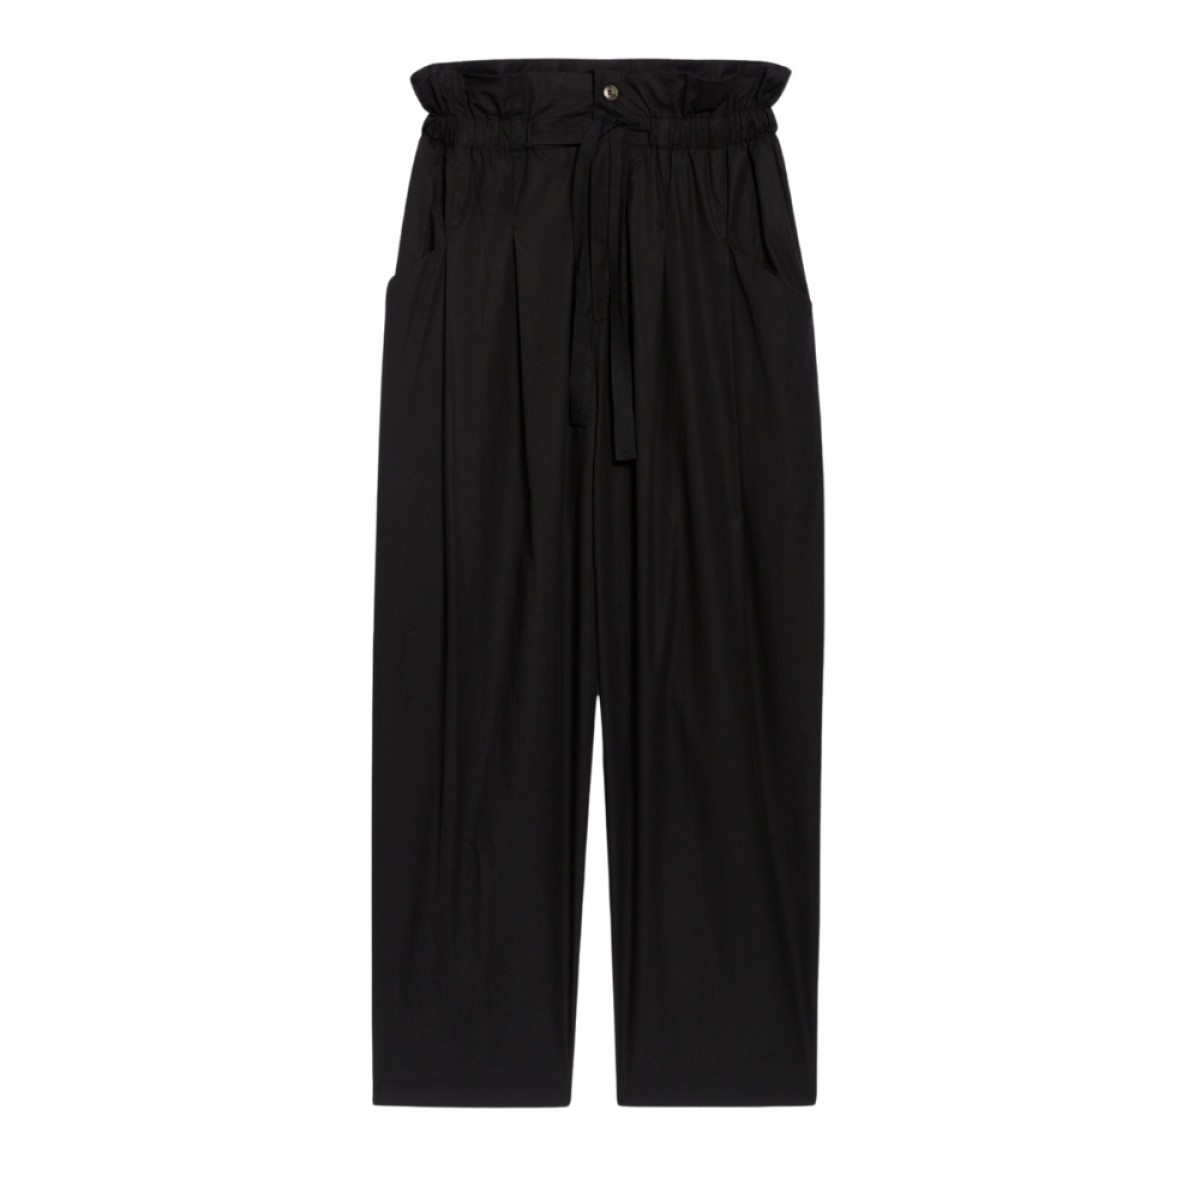 casimir trousers - black - front